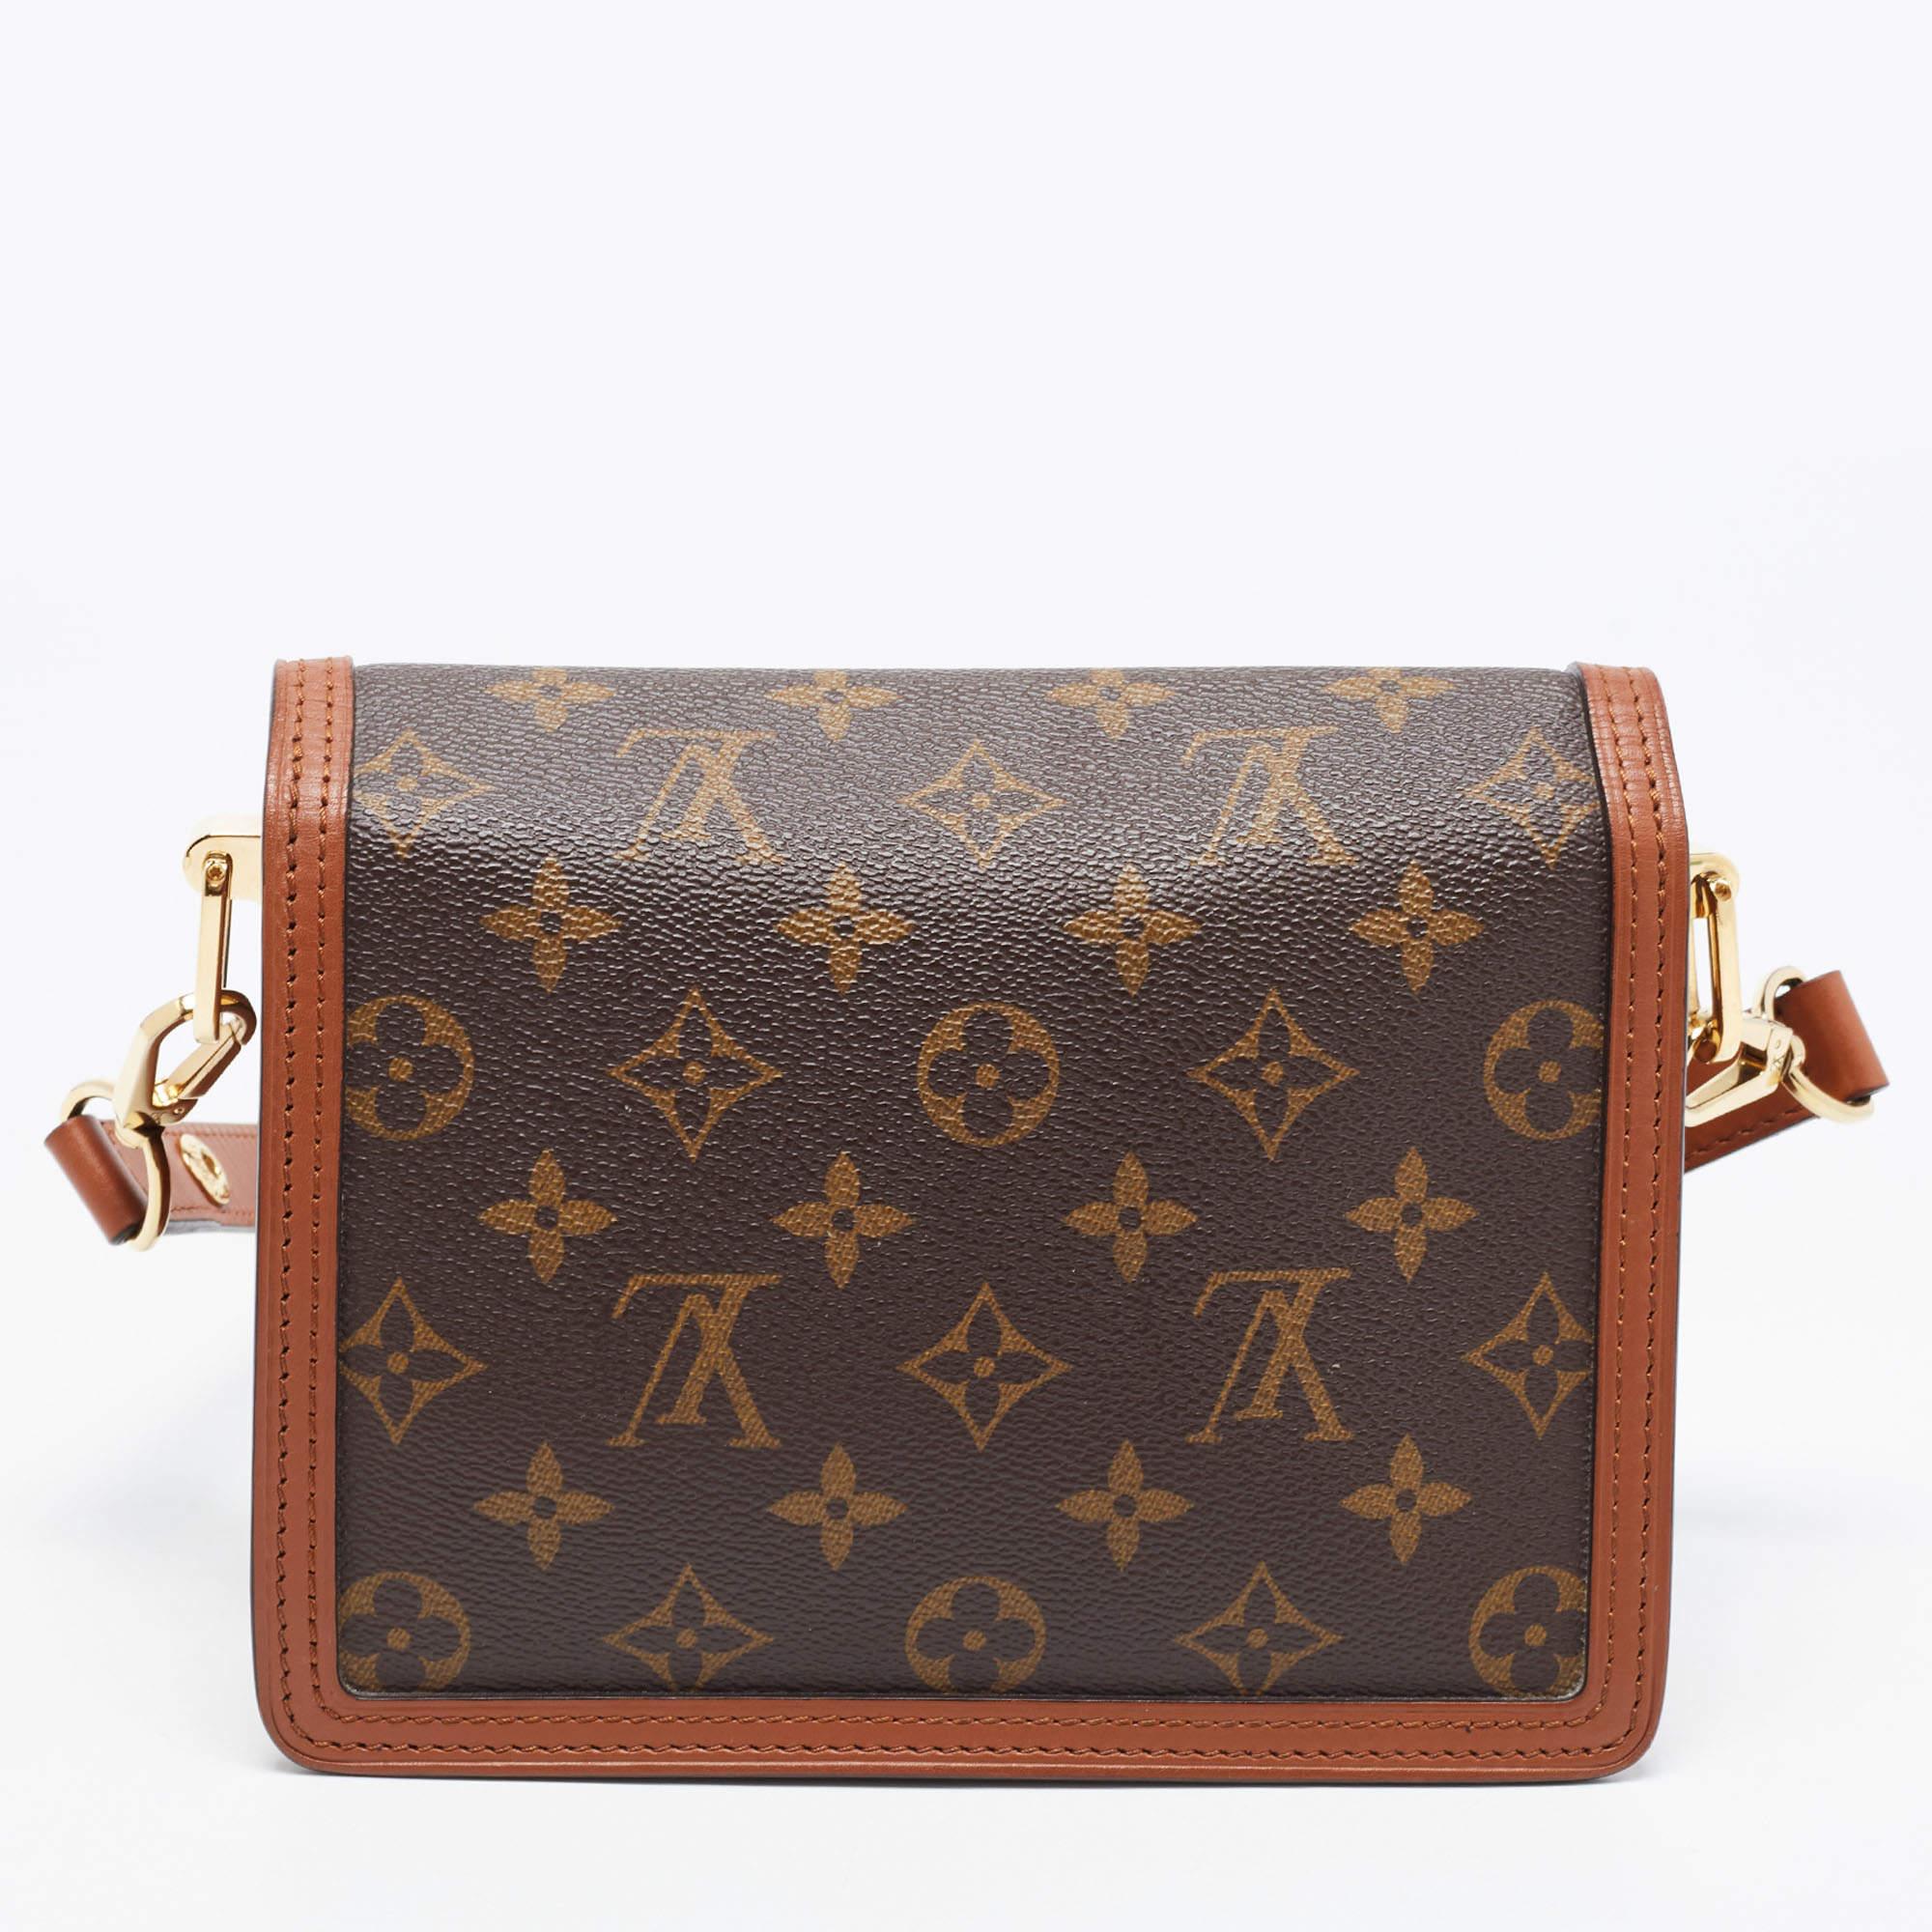 Monogram Dauphine Belt bag in Monogram & Reverse Monogram Coated Canvas  with a Calfskin trim and gold tone hardware and black microfibre lining.  Louis Vuitton. 2019., Handbags and Accessories Online